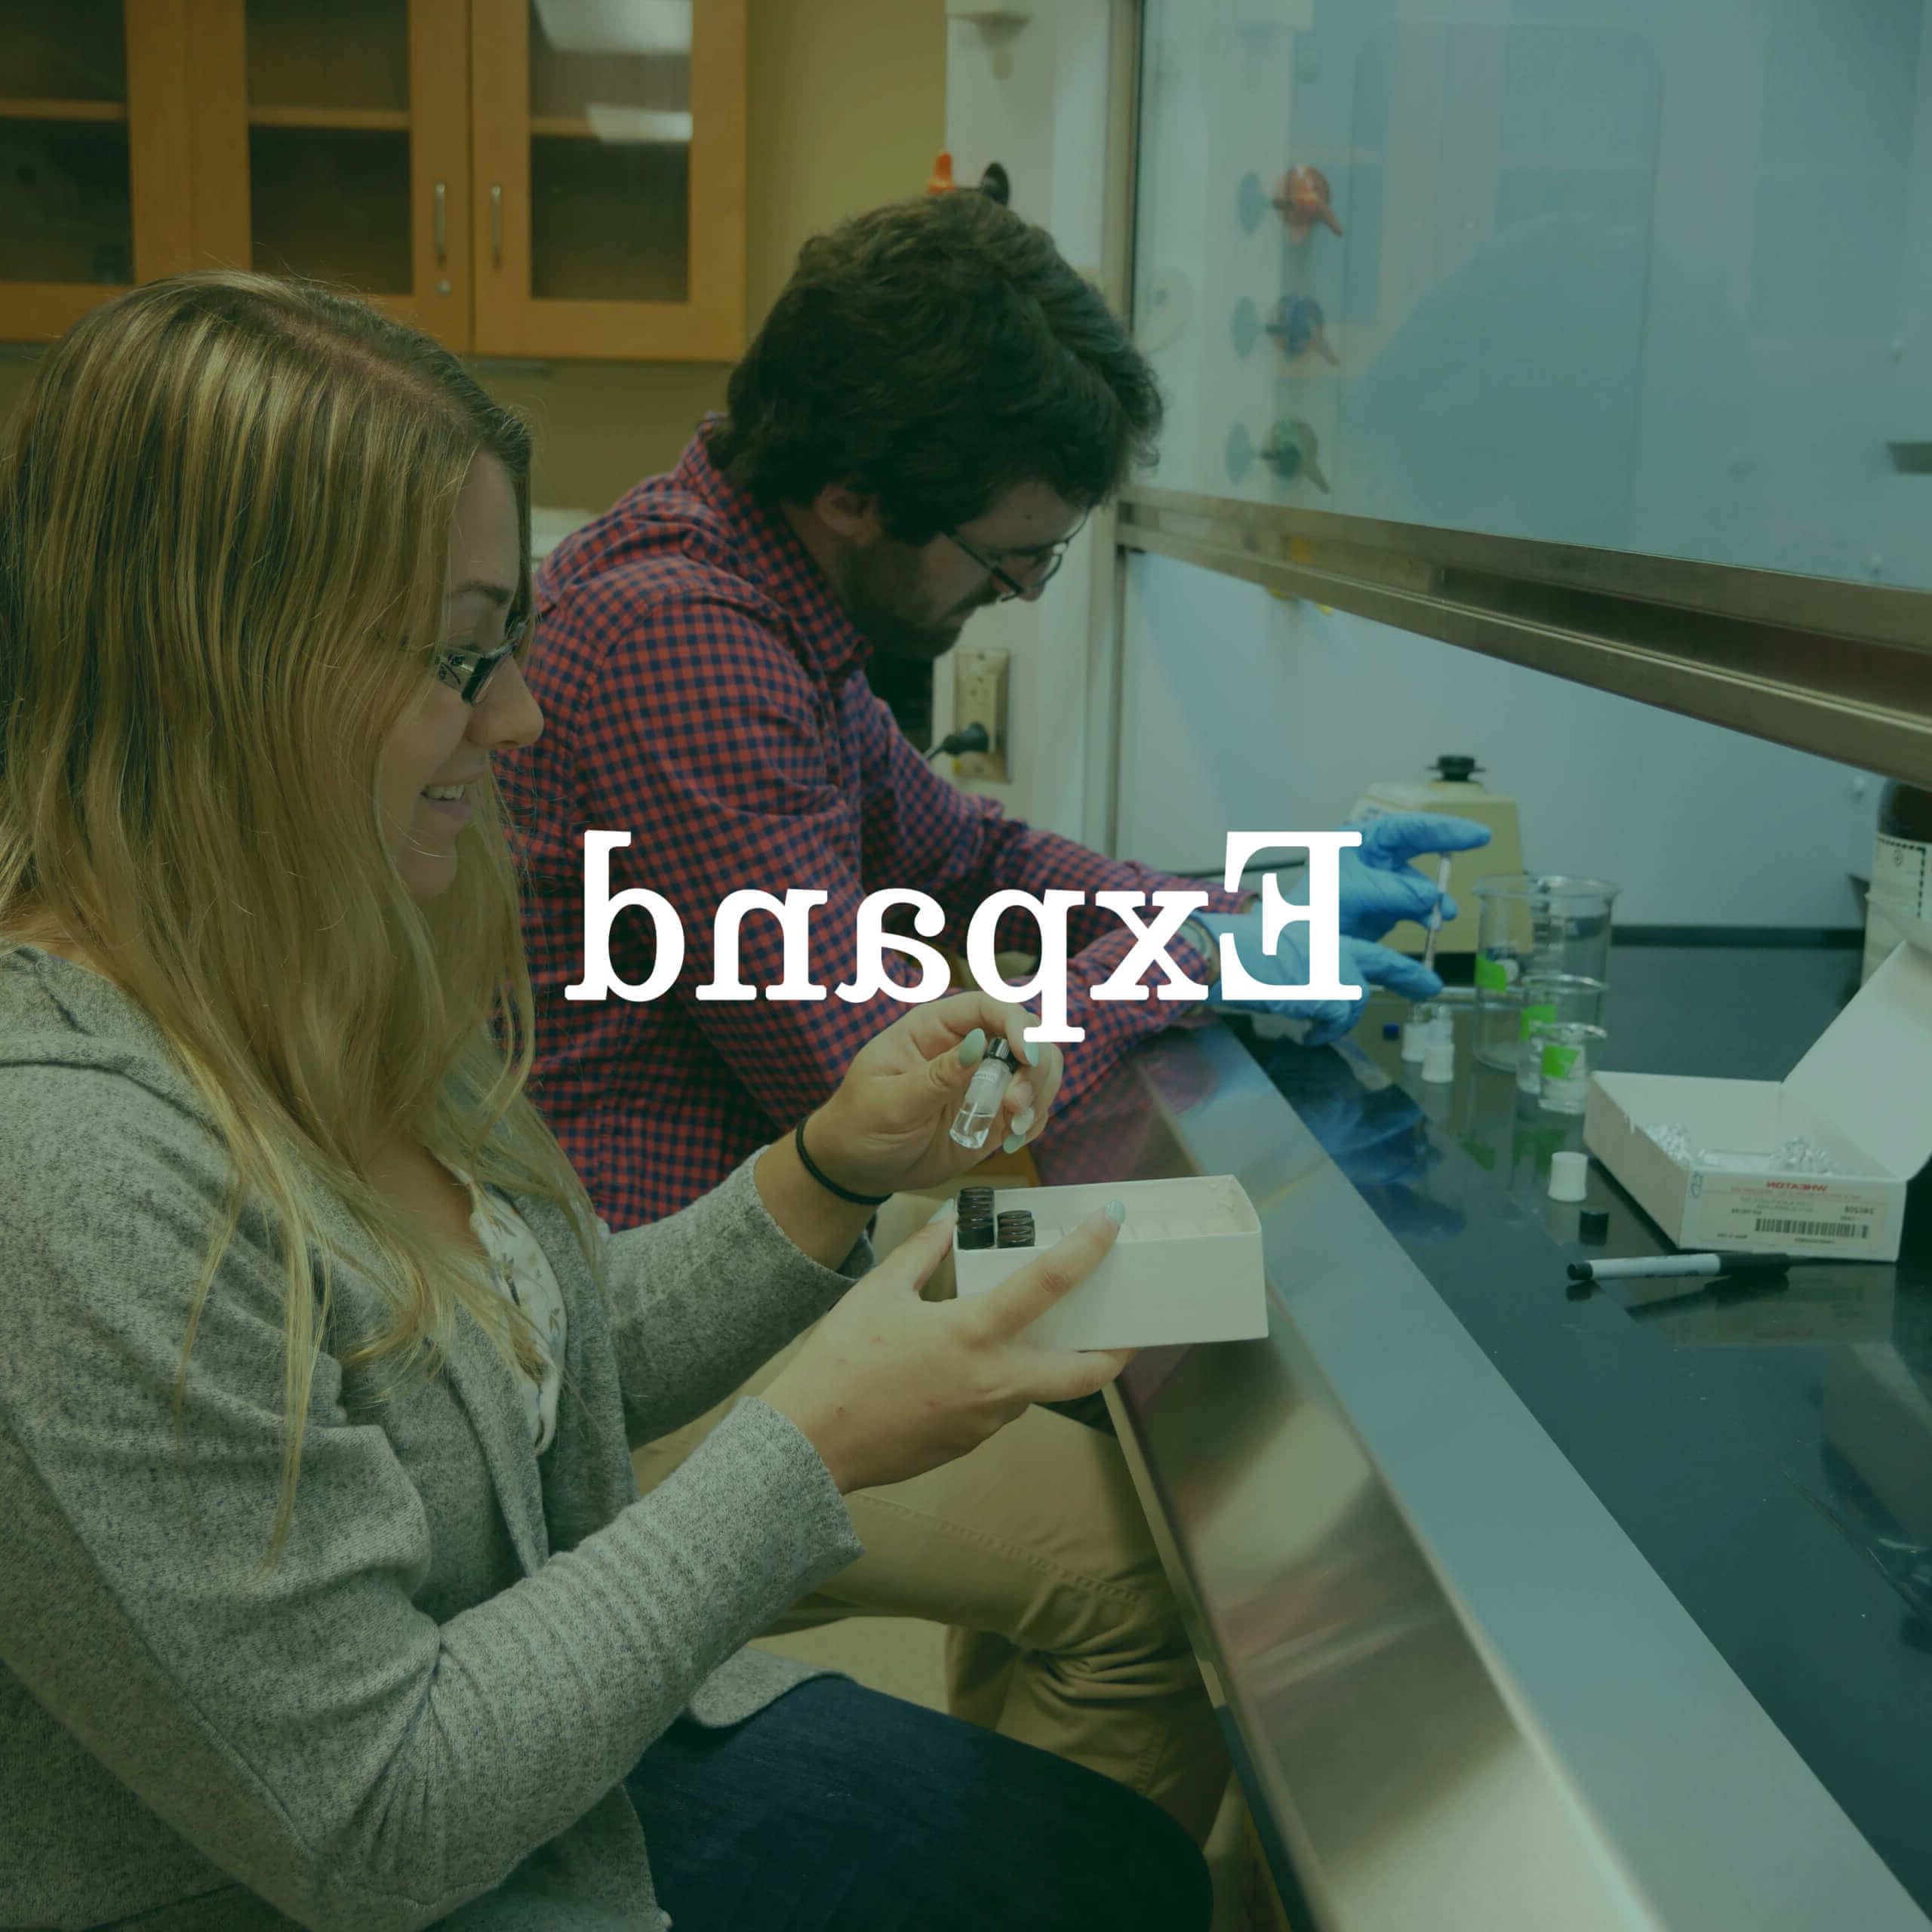 Photo of students working at a lab bench with a text overlay that reads "Expand."